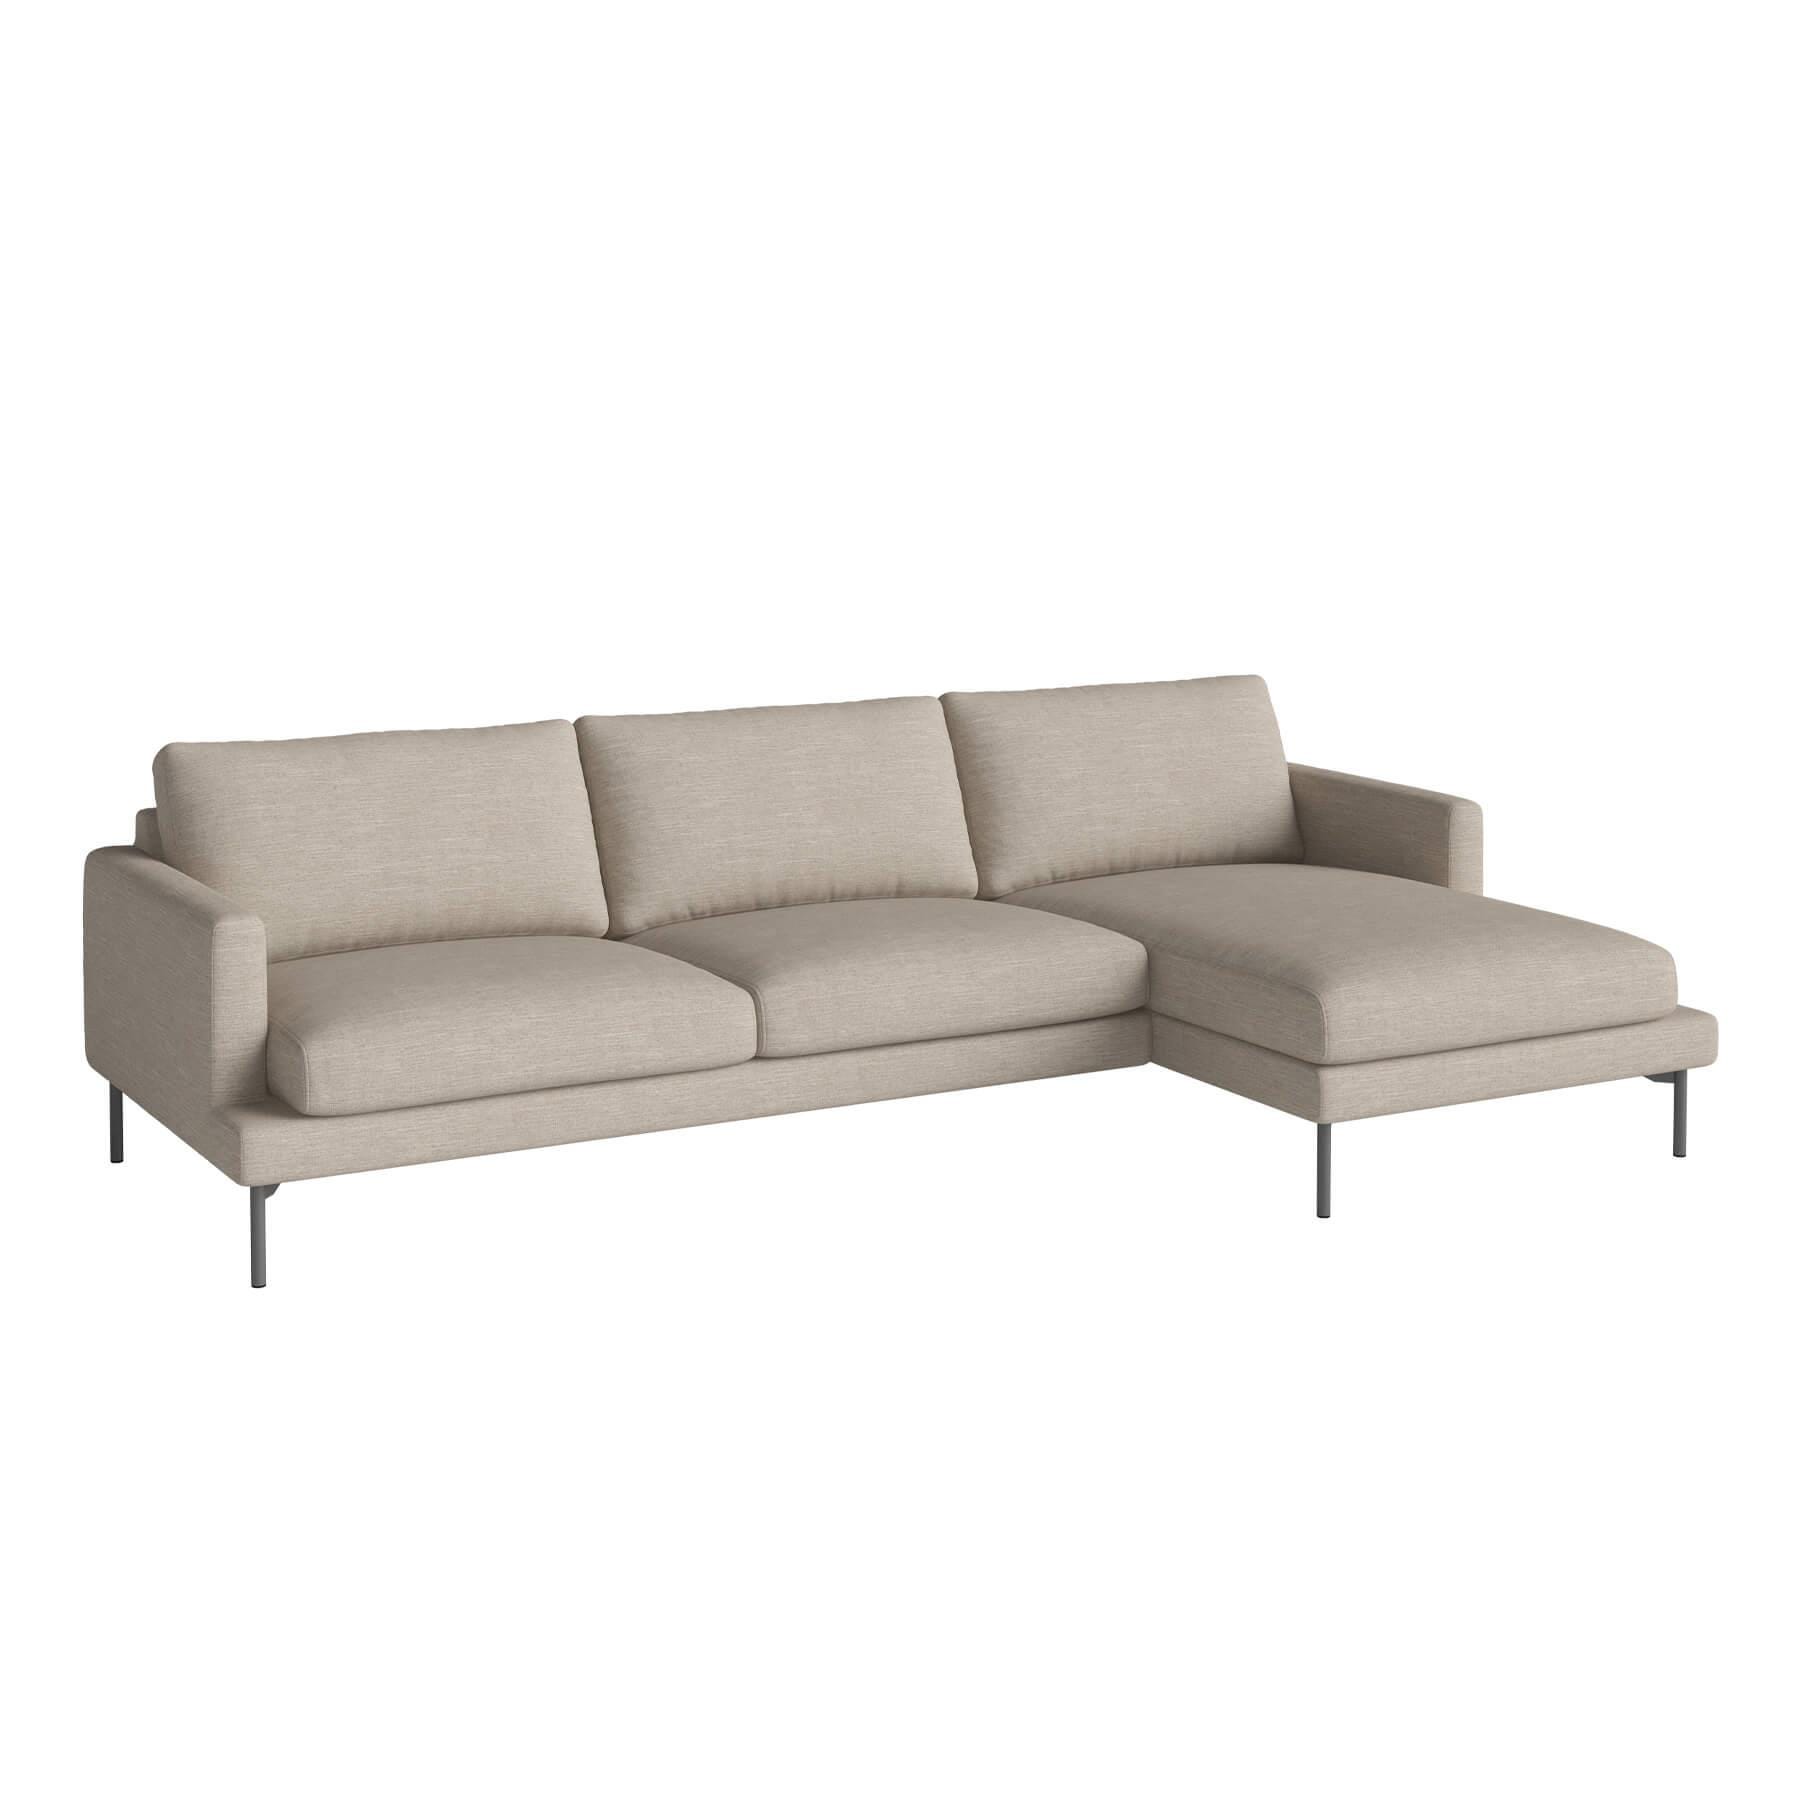 Bolia Veneda Sofa 35 Seater Sofa With Chaise Longue Grey Laquered Steel Baize Sand Right Brown Designer Furniture From Holloways Of Ludlow